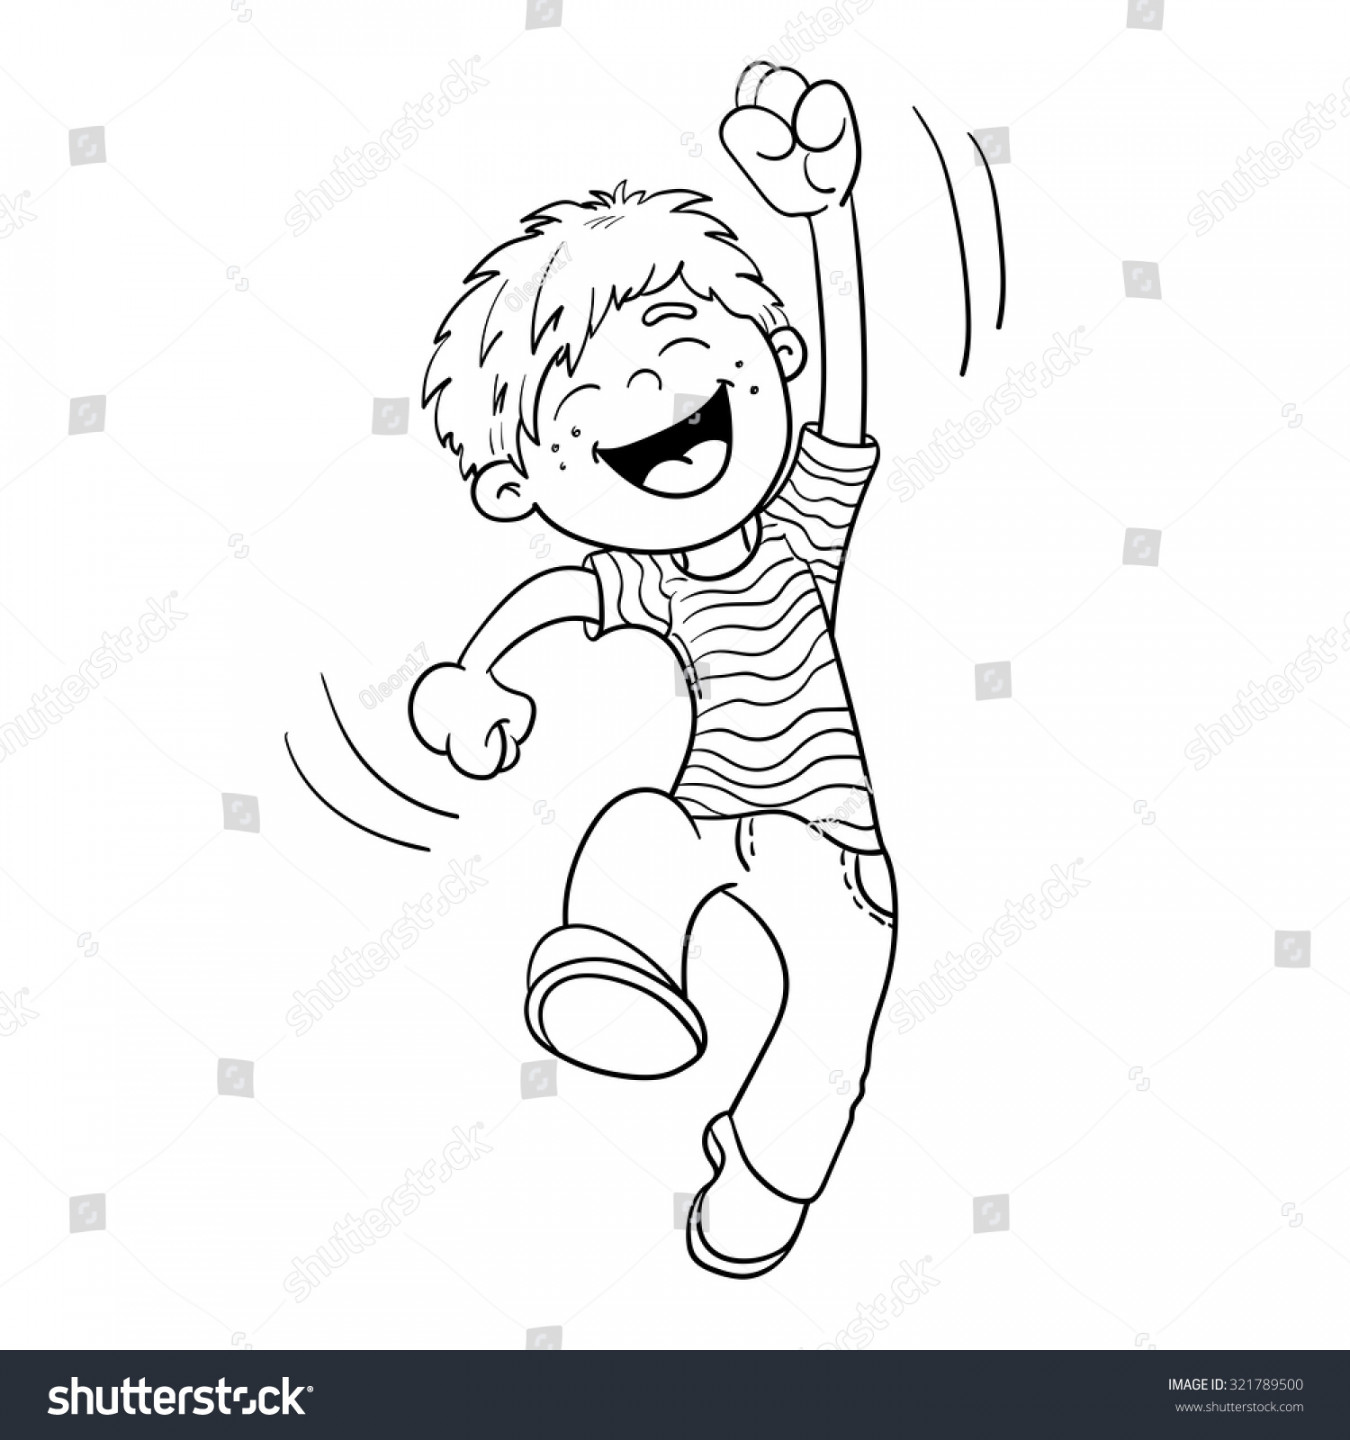 Coloring Page Outline Cartoon Jumping Boy Stock Vector (Royalty